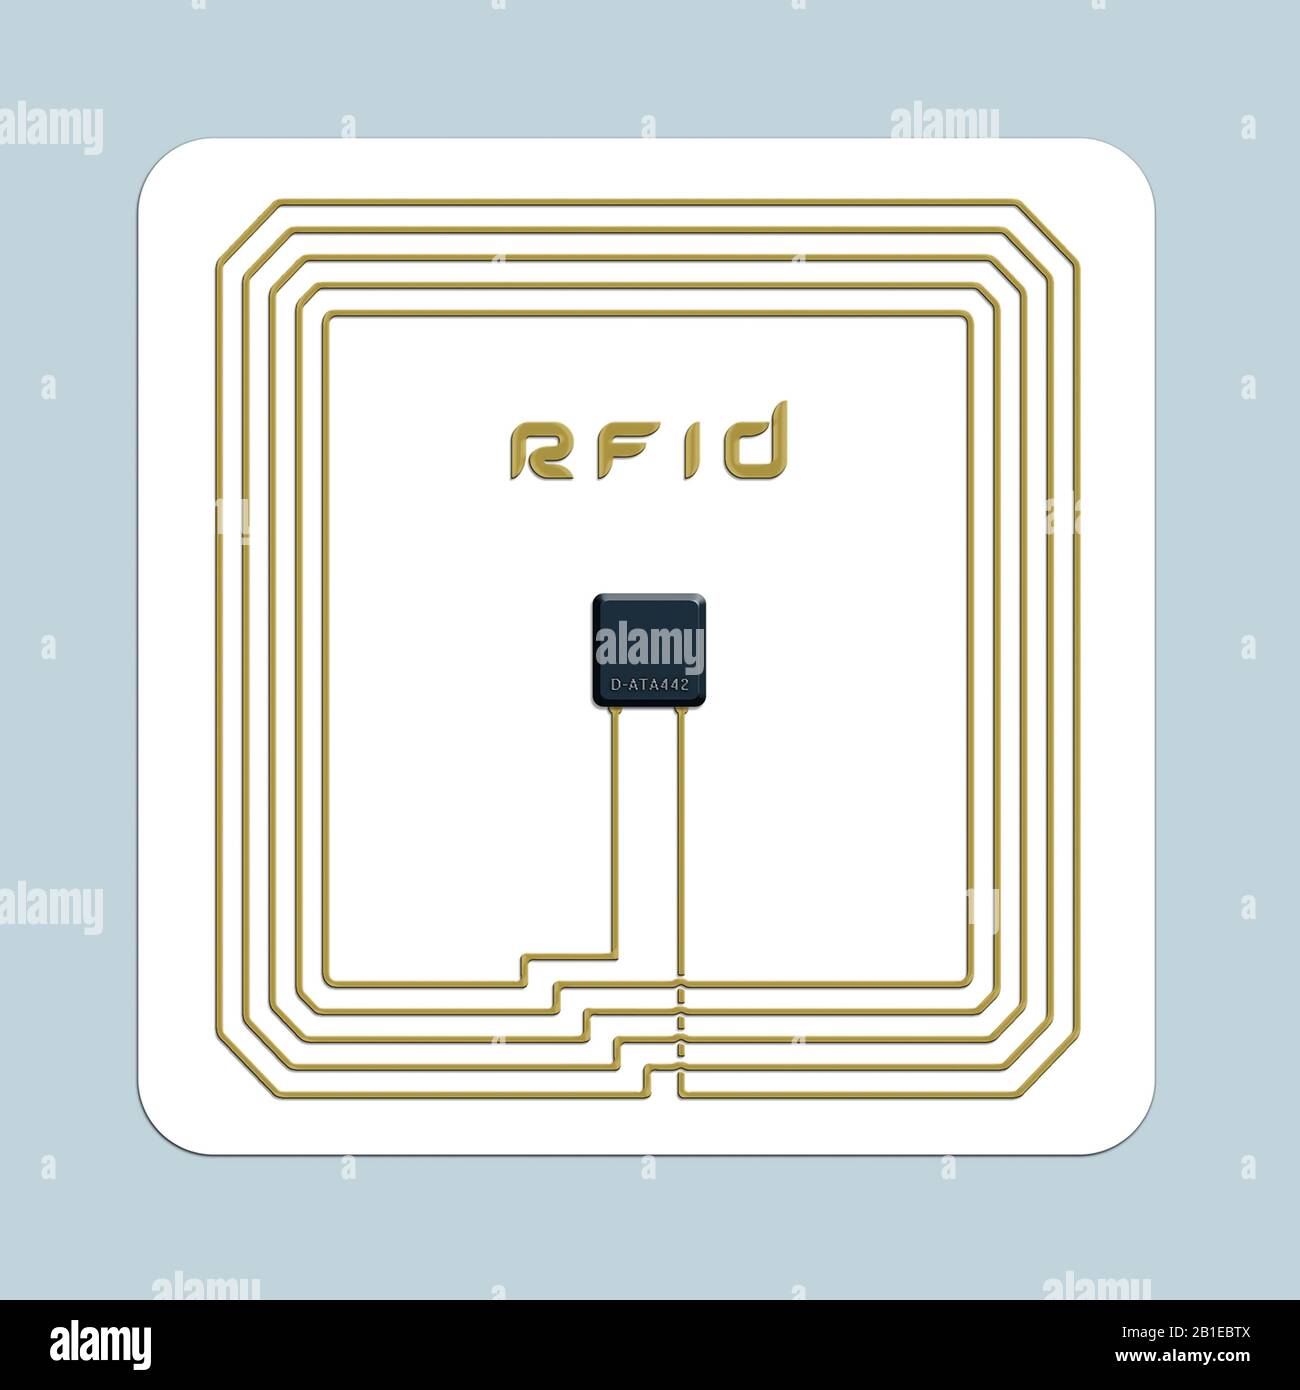 Computer graphic, illustration of RFID chip against grey background - ID card Stock Photo